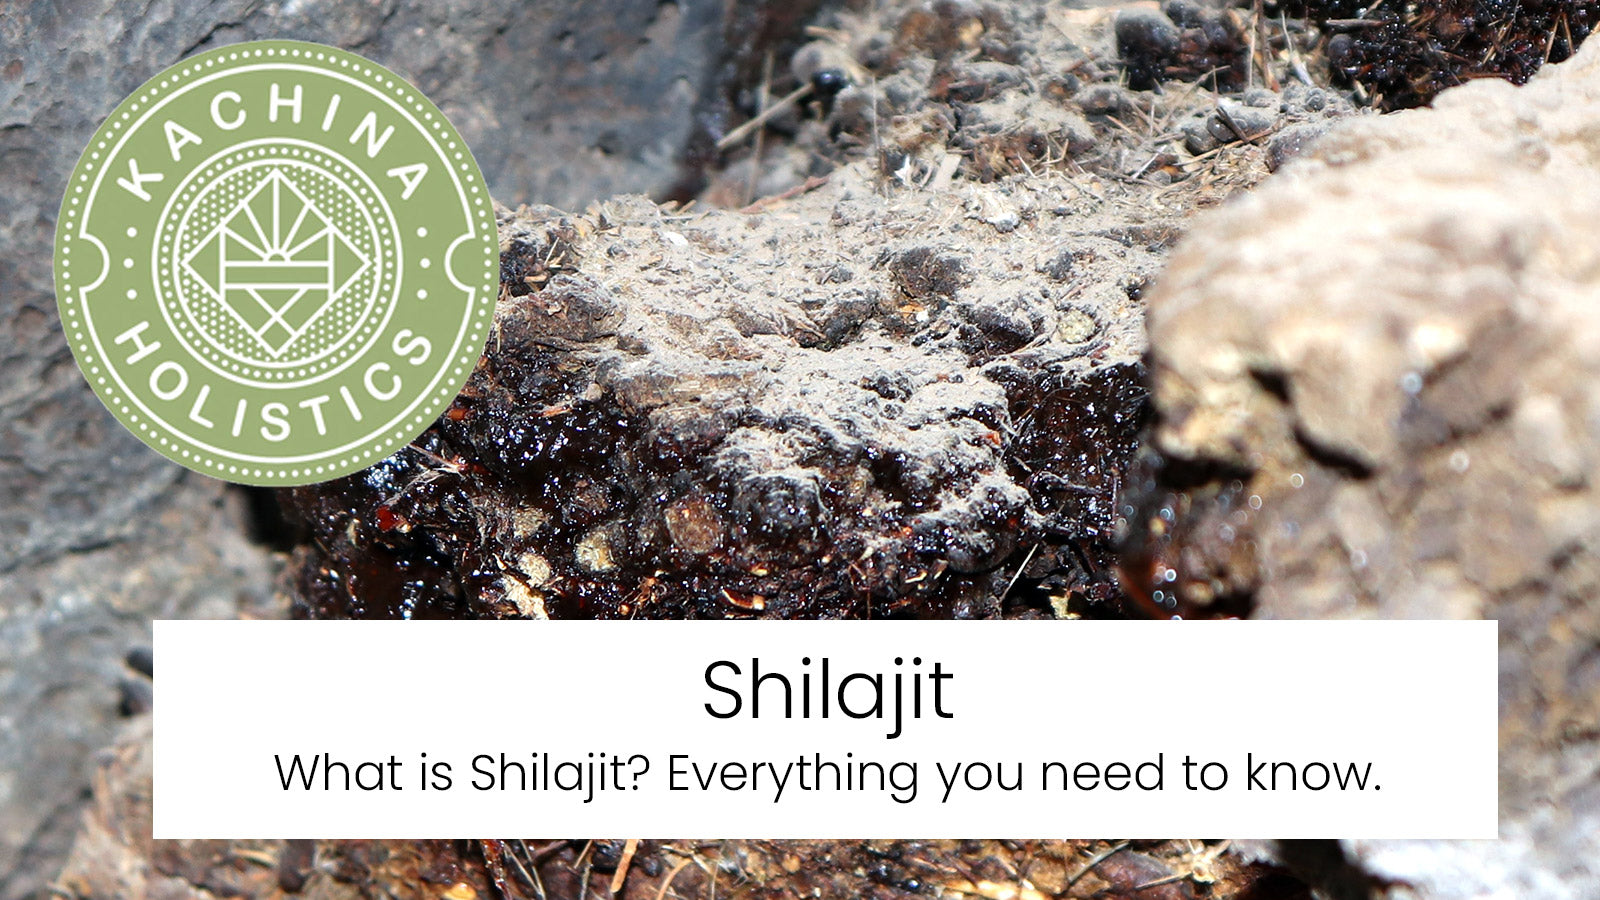 What is Shilajit? Origin, Benefits and How To Use